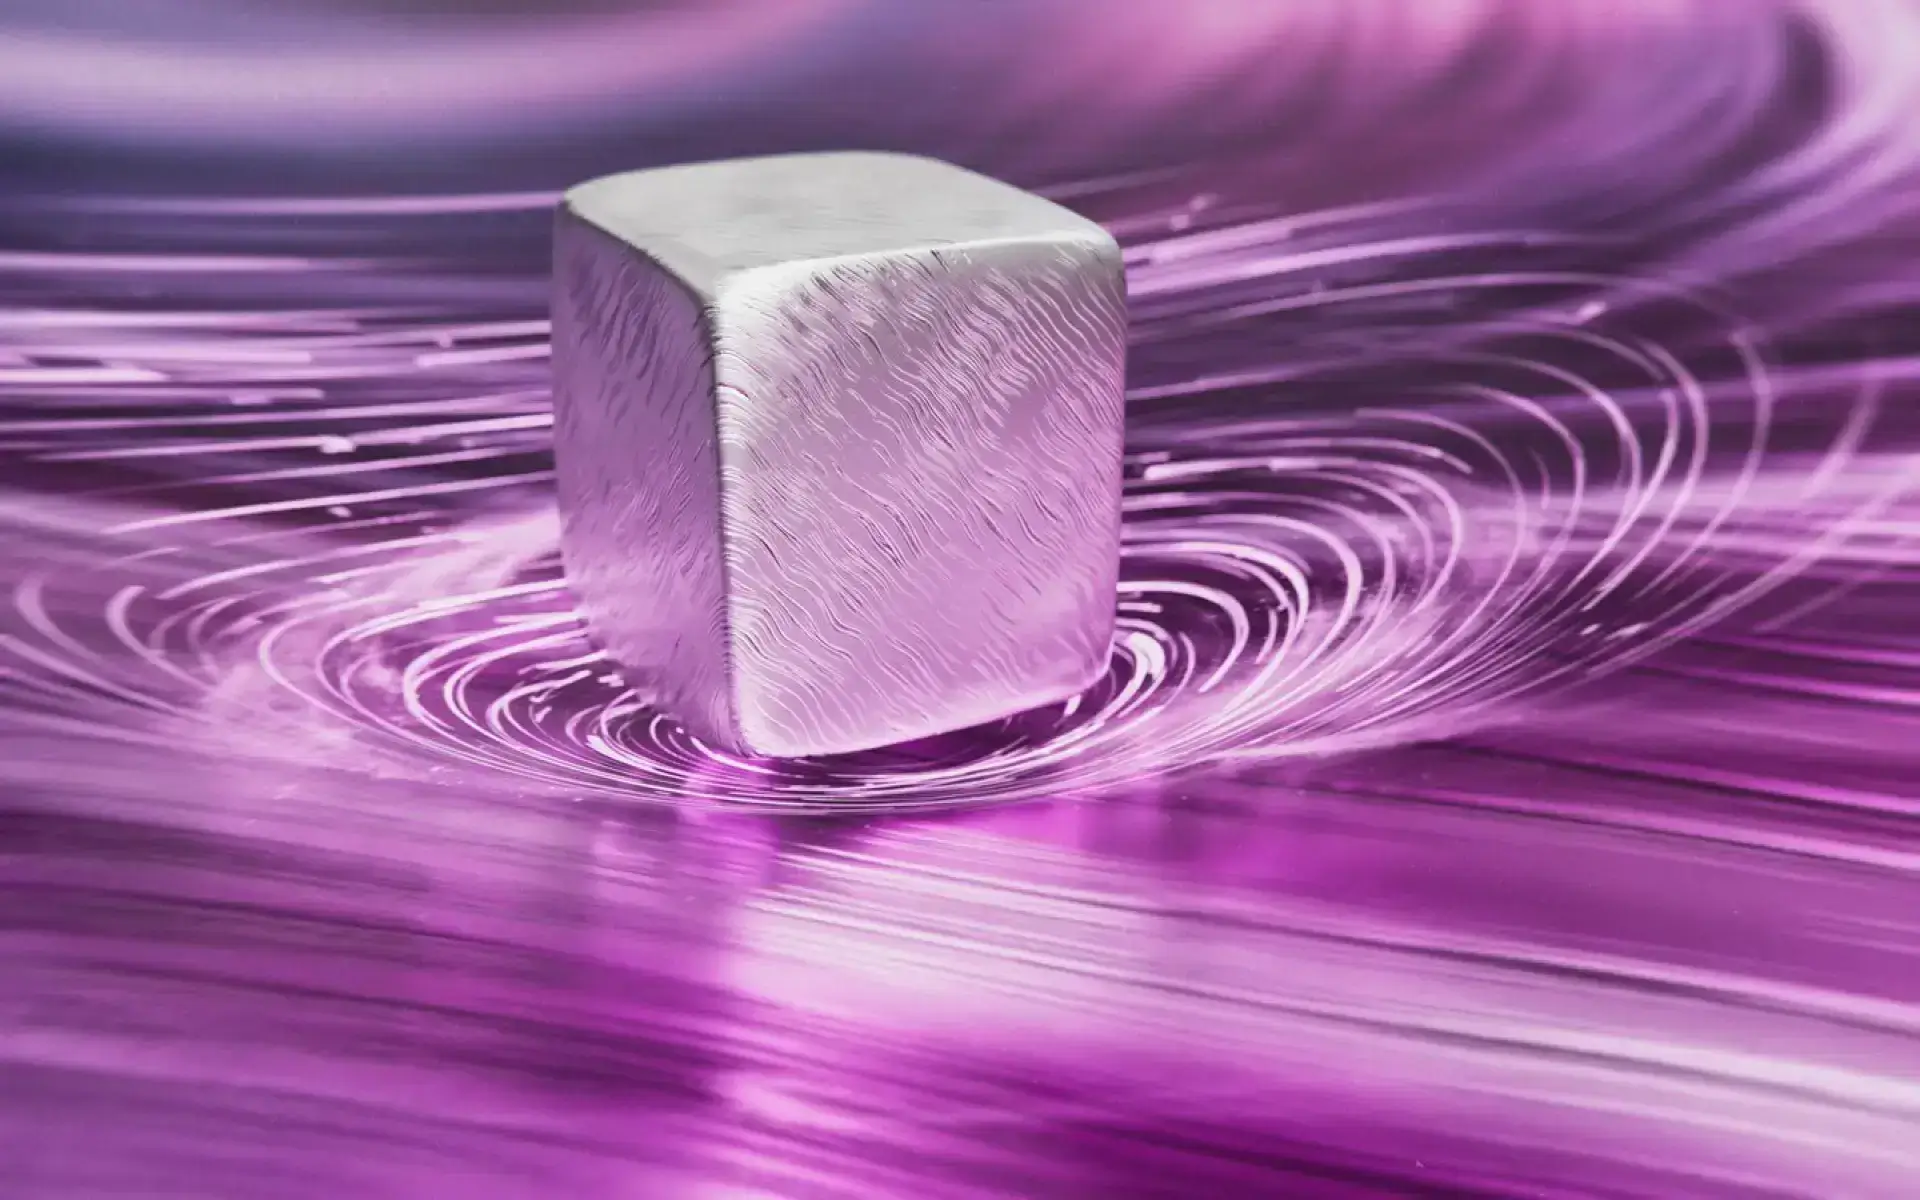 A Superconductor Found in Nature has Shaken the Scientific World